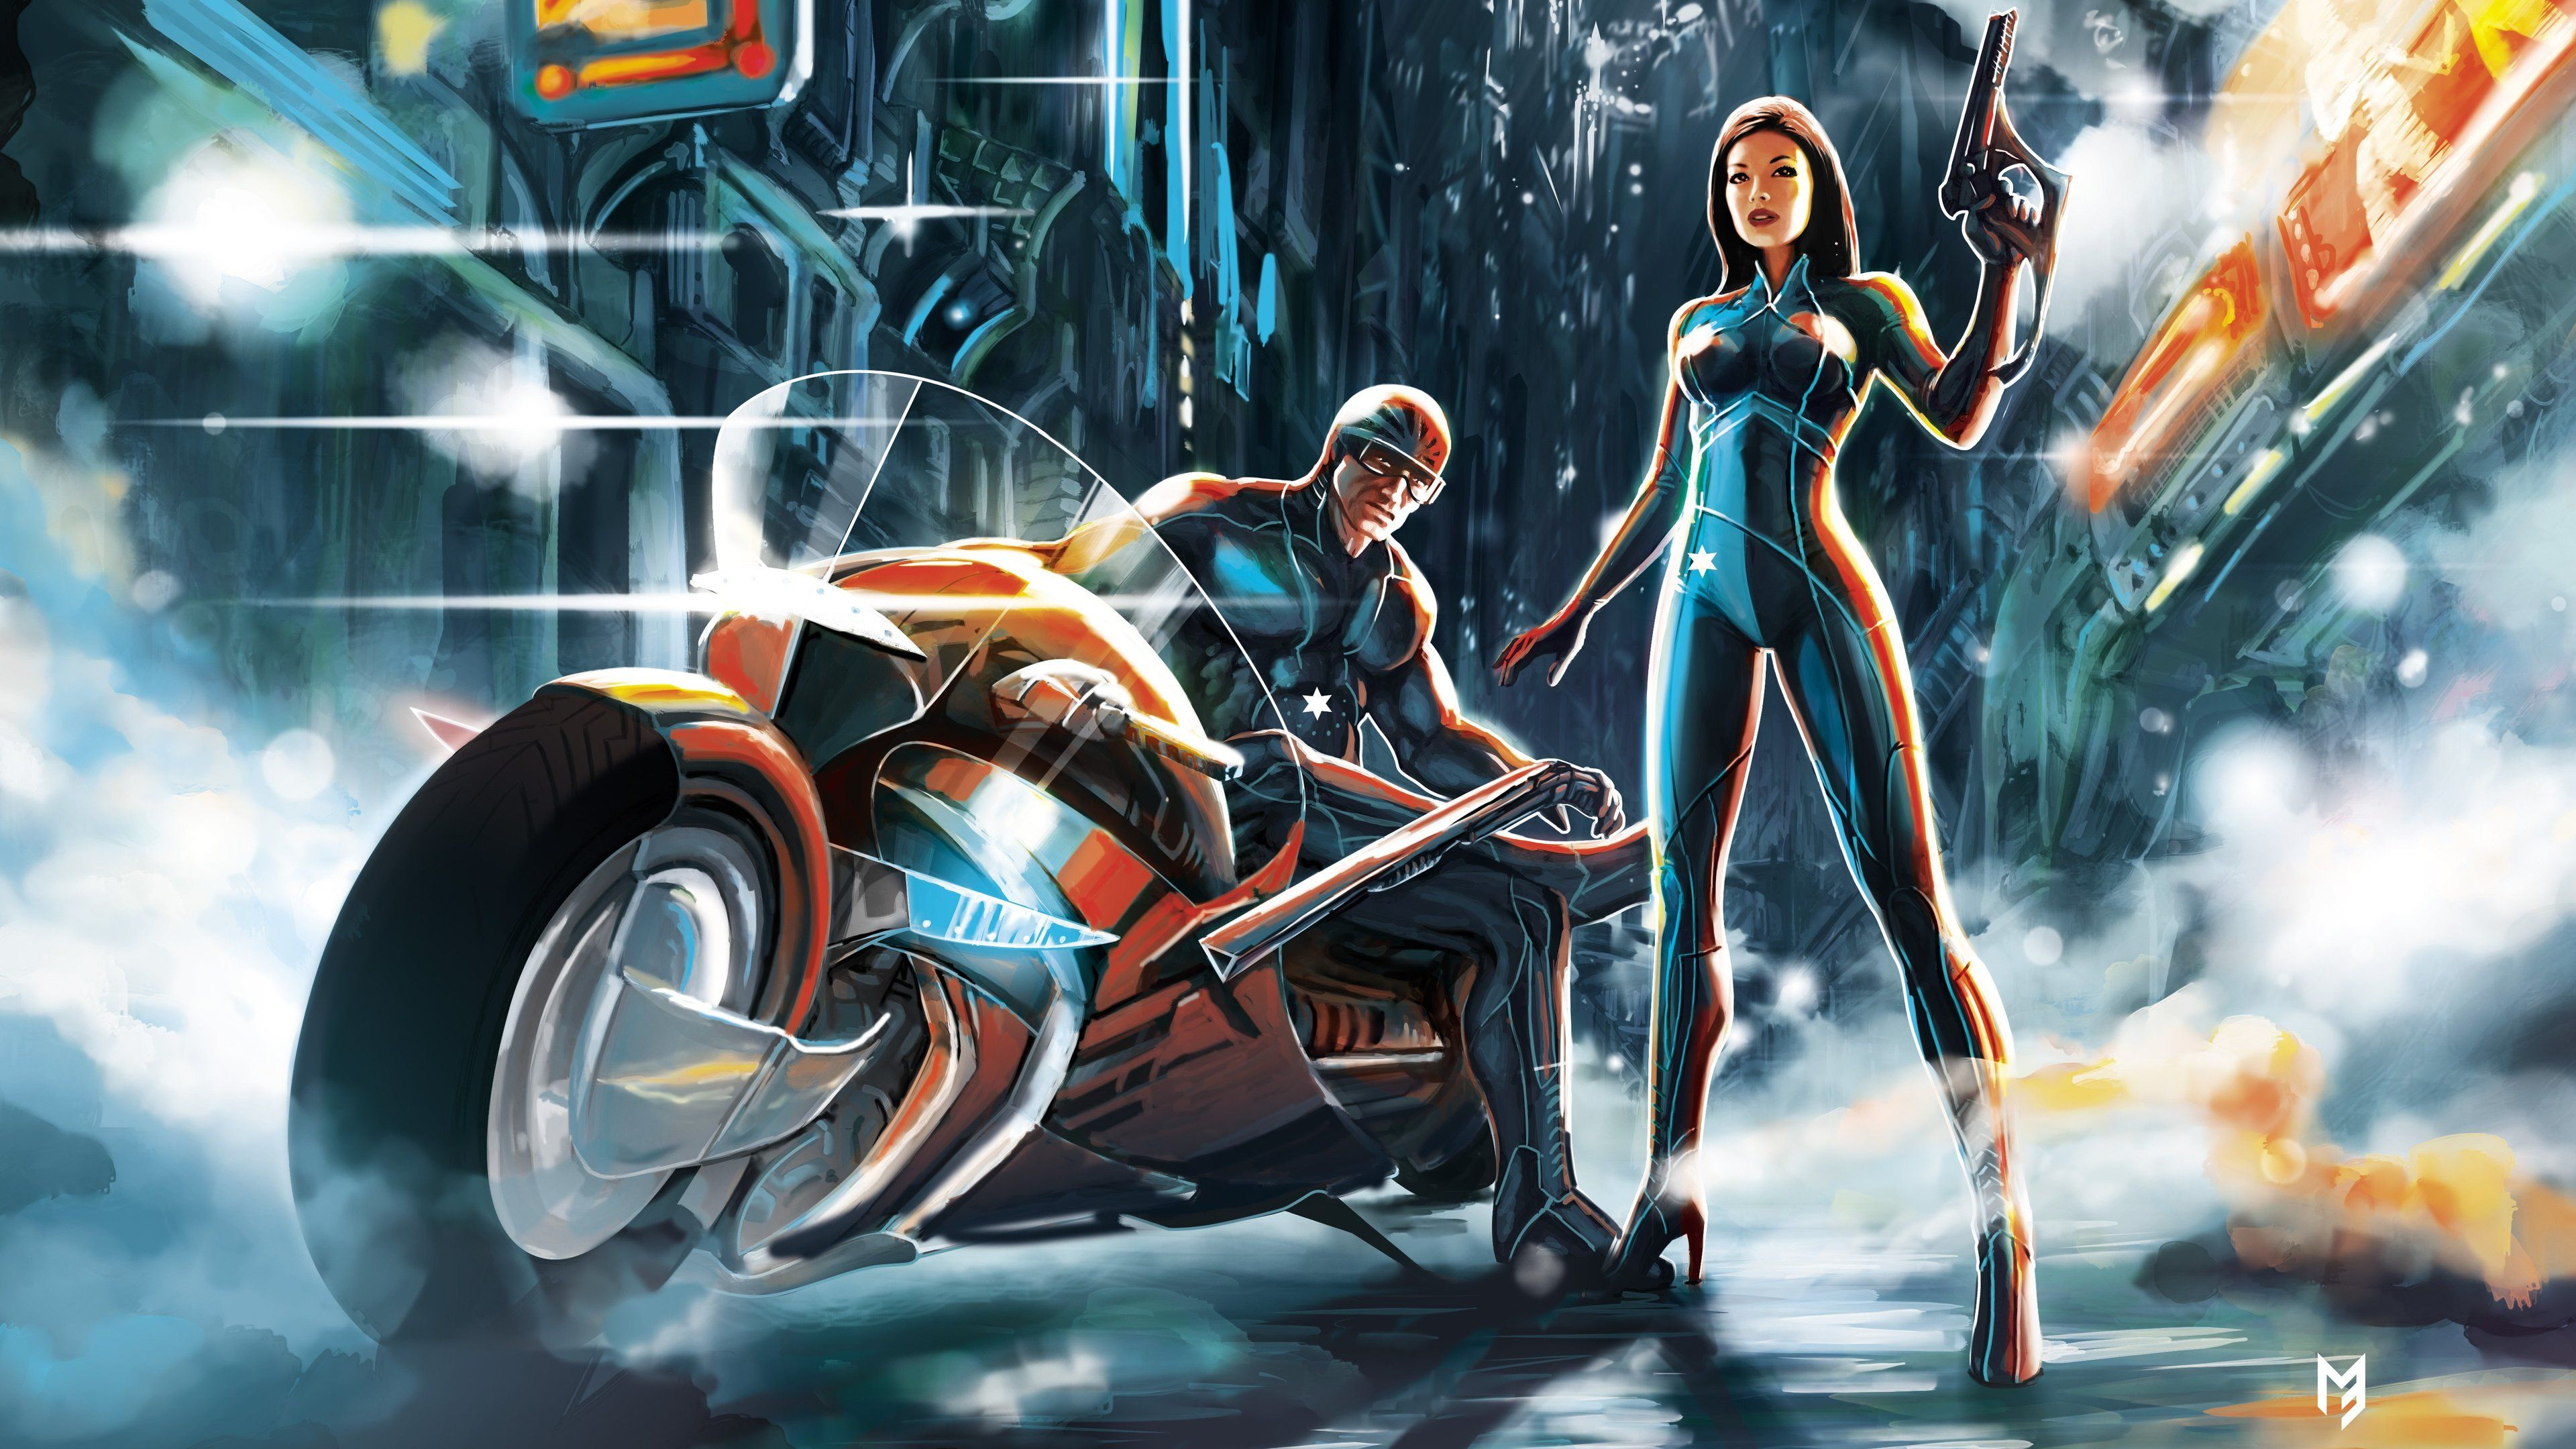 3840x2160 Scifi Futuristic Warrior Girl And Boy With Bike scifi wallpapers, hd- wallpapers, digital art wallpapers, artwork &acirc;&#128;&brvbar; | Warriors wallpaper, Warrior girl, Art wallpaper